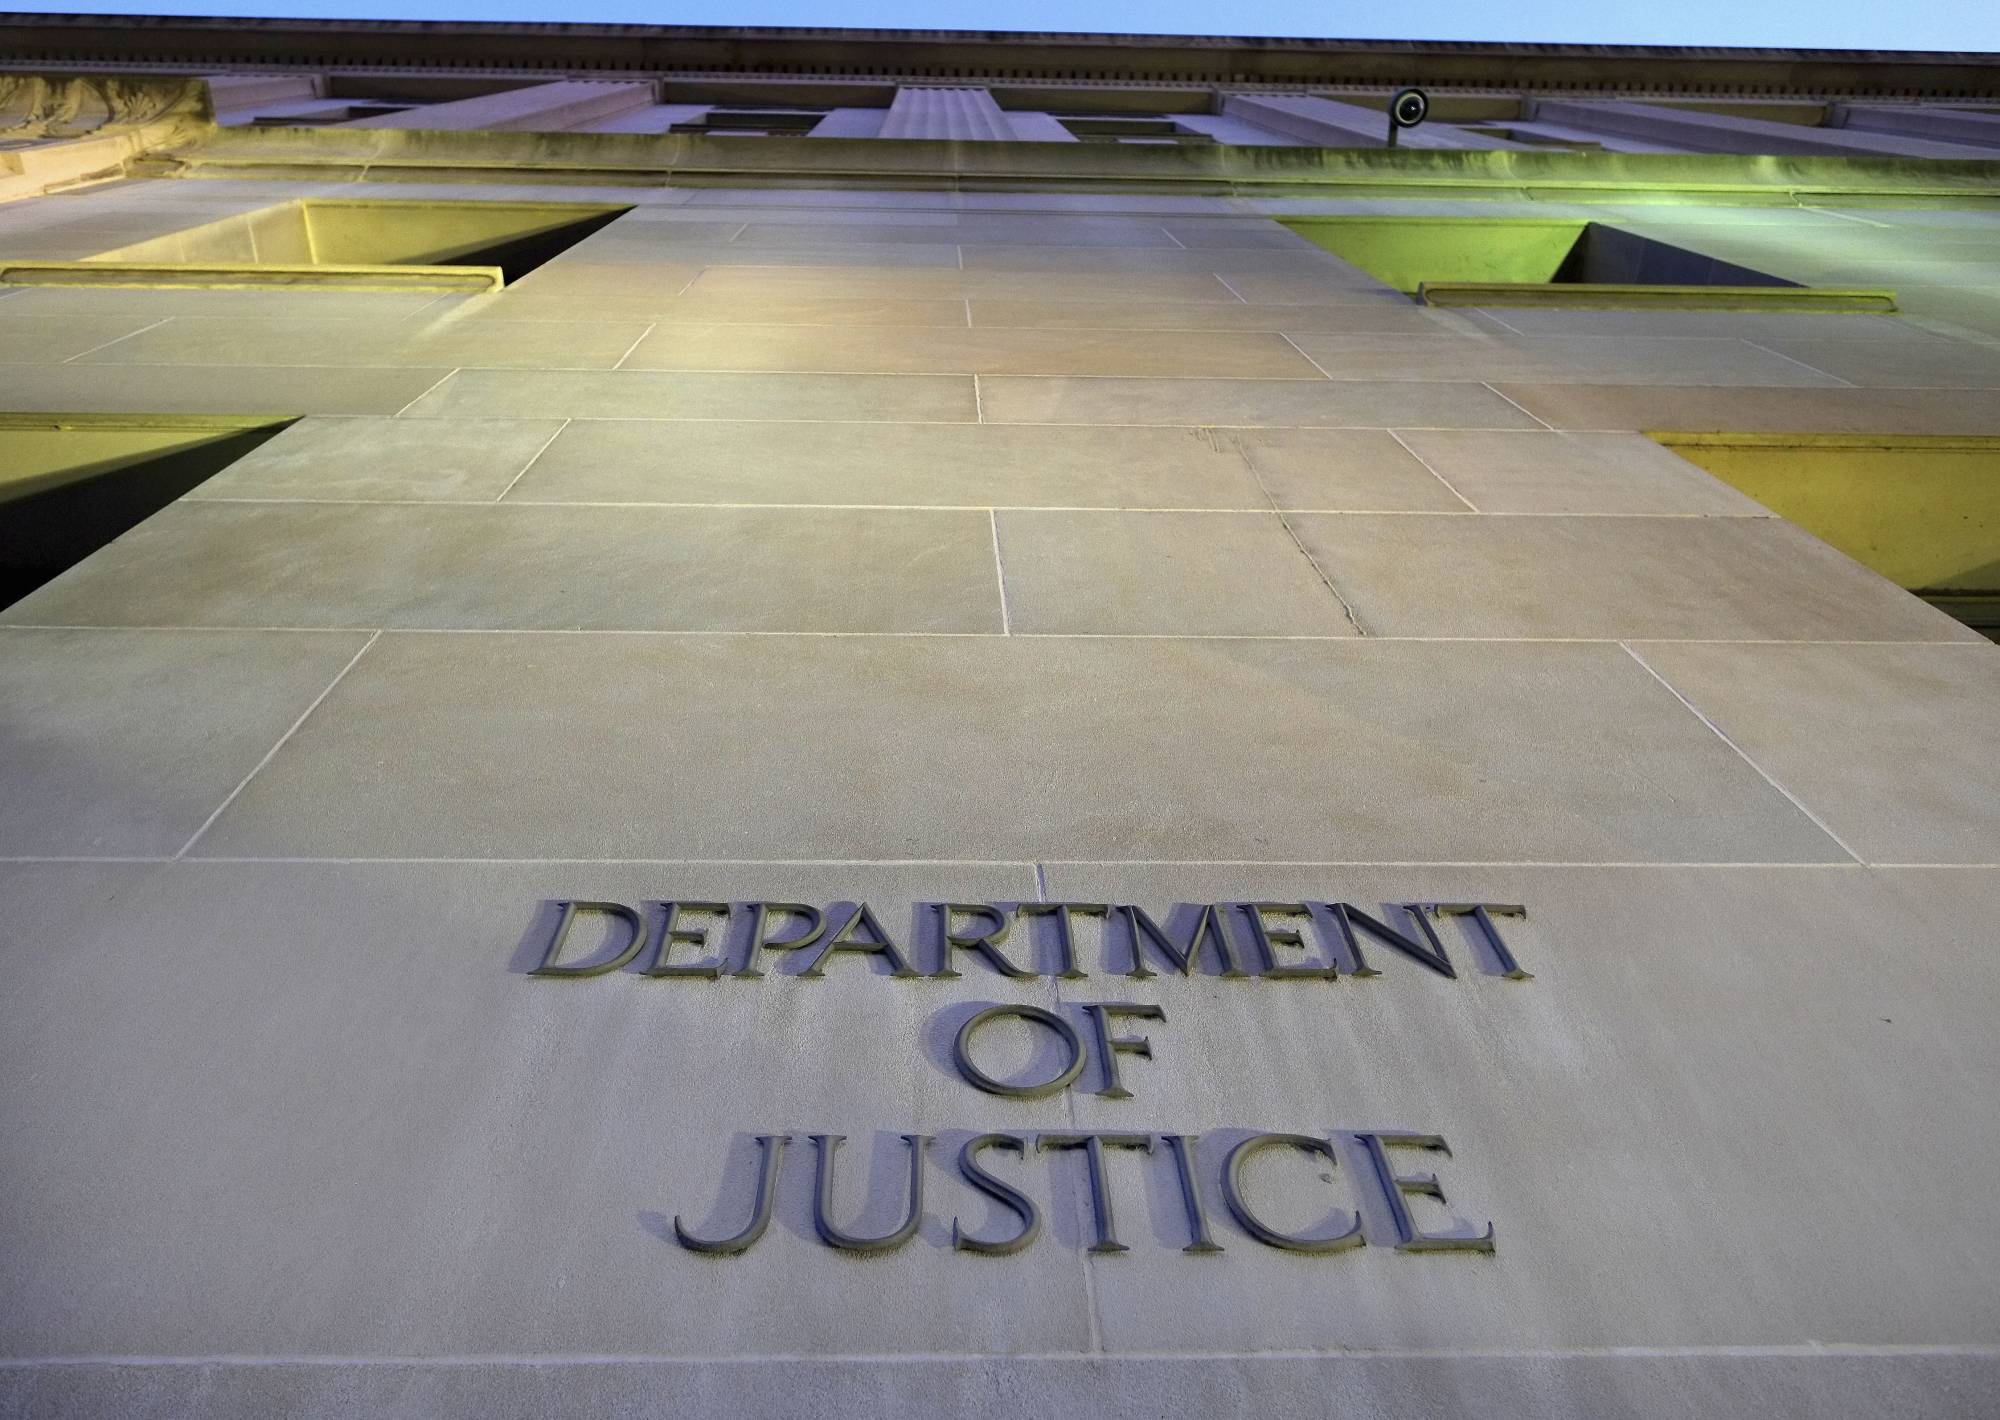 FILE - In this May 14, 2013, file photo, the Department of Justice headquarters building in Washington is photographed early in the morning. The Trump administration has stepped up scrutiny of asbestos trust funds out of concern of fraud and abuse. The Justice Department worries the pots of money intended to help people exposed to the hazardous substance are being depleted by fraudulent claims _ harming victims, businesses and the government. (AP Photo/J. David Ake, File)